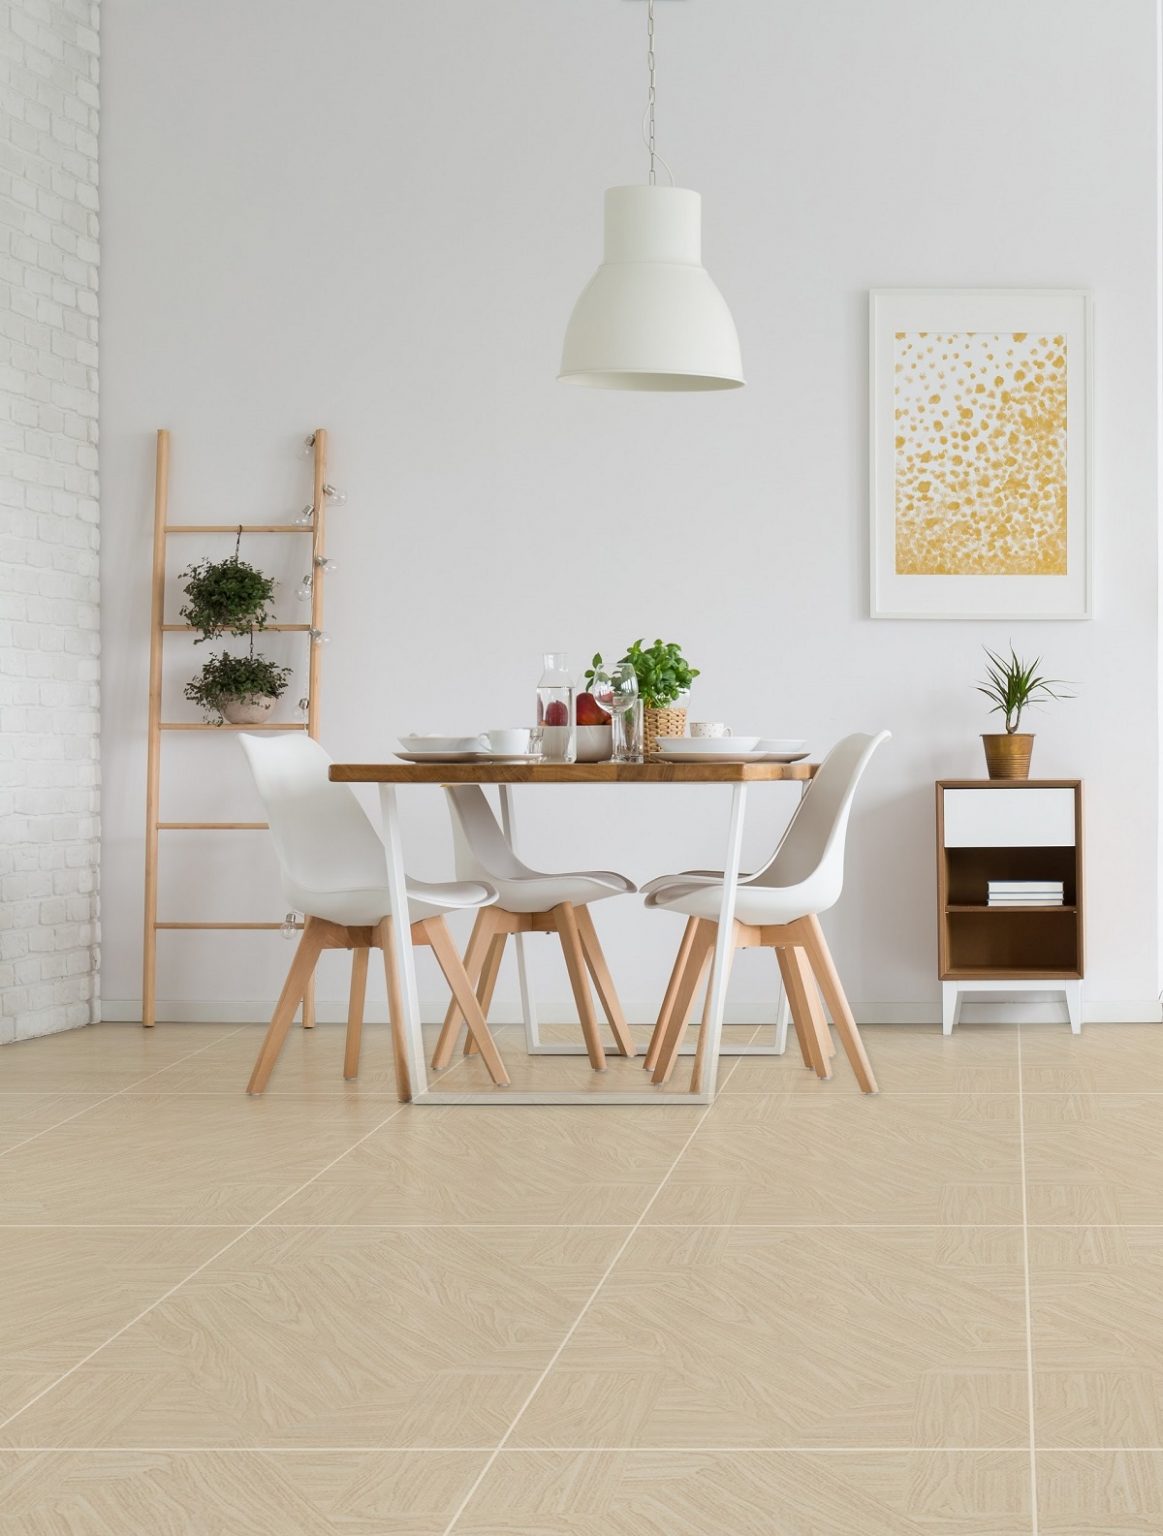 4 Best Dining Room Trends for 2021